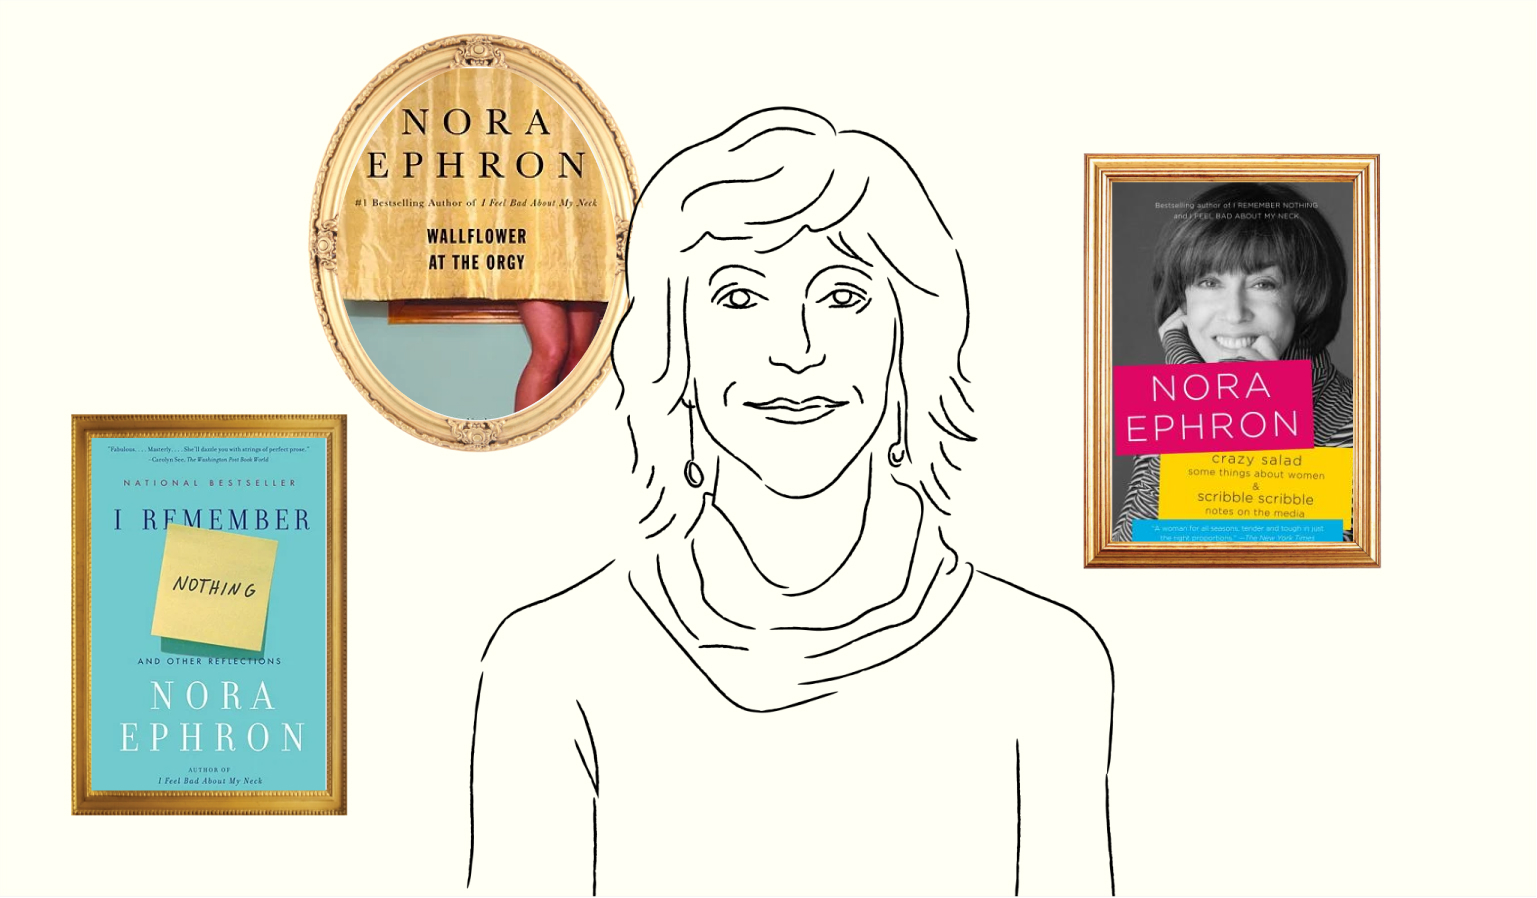 Article image for: A List of My Favorite Nora Ephron Books for Her Birthday